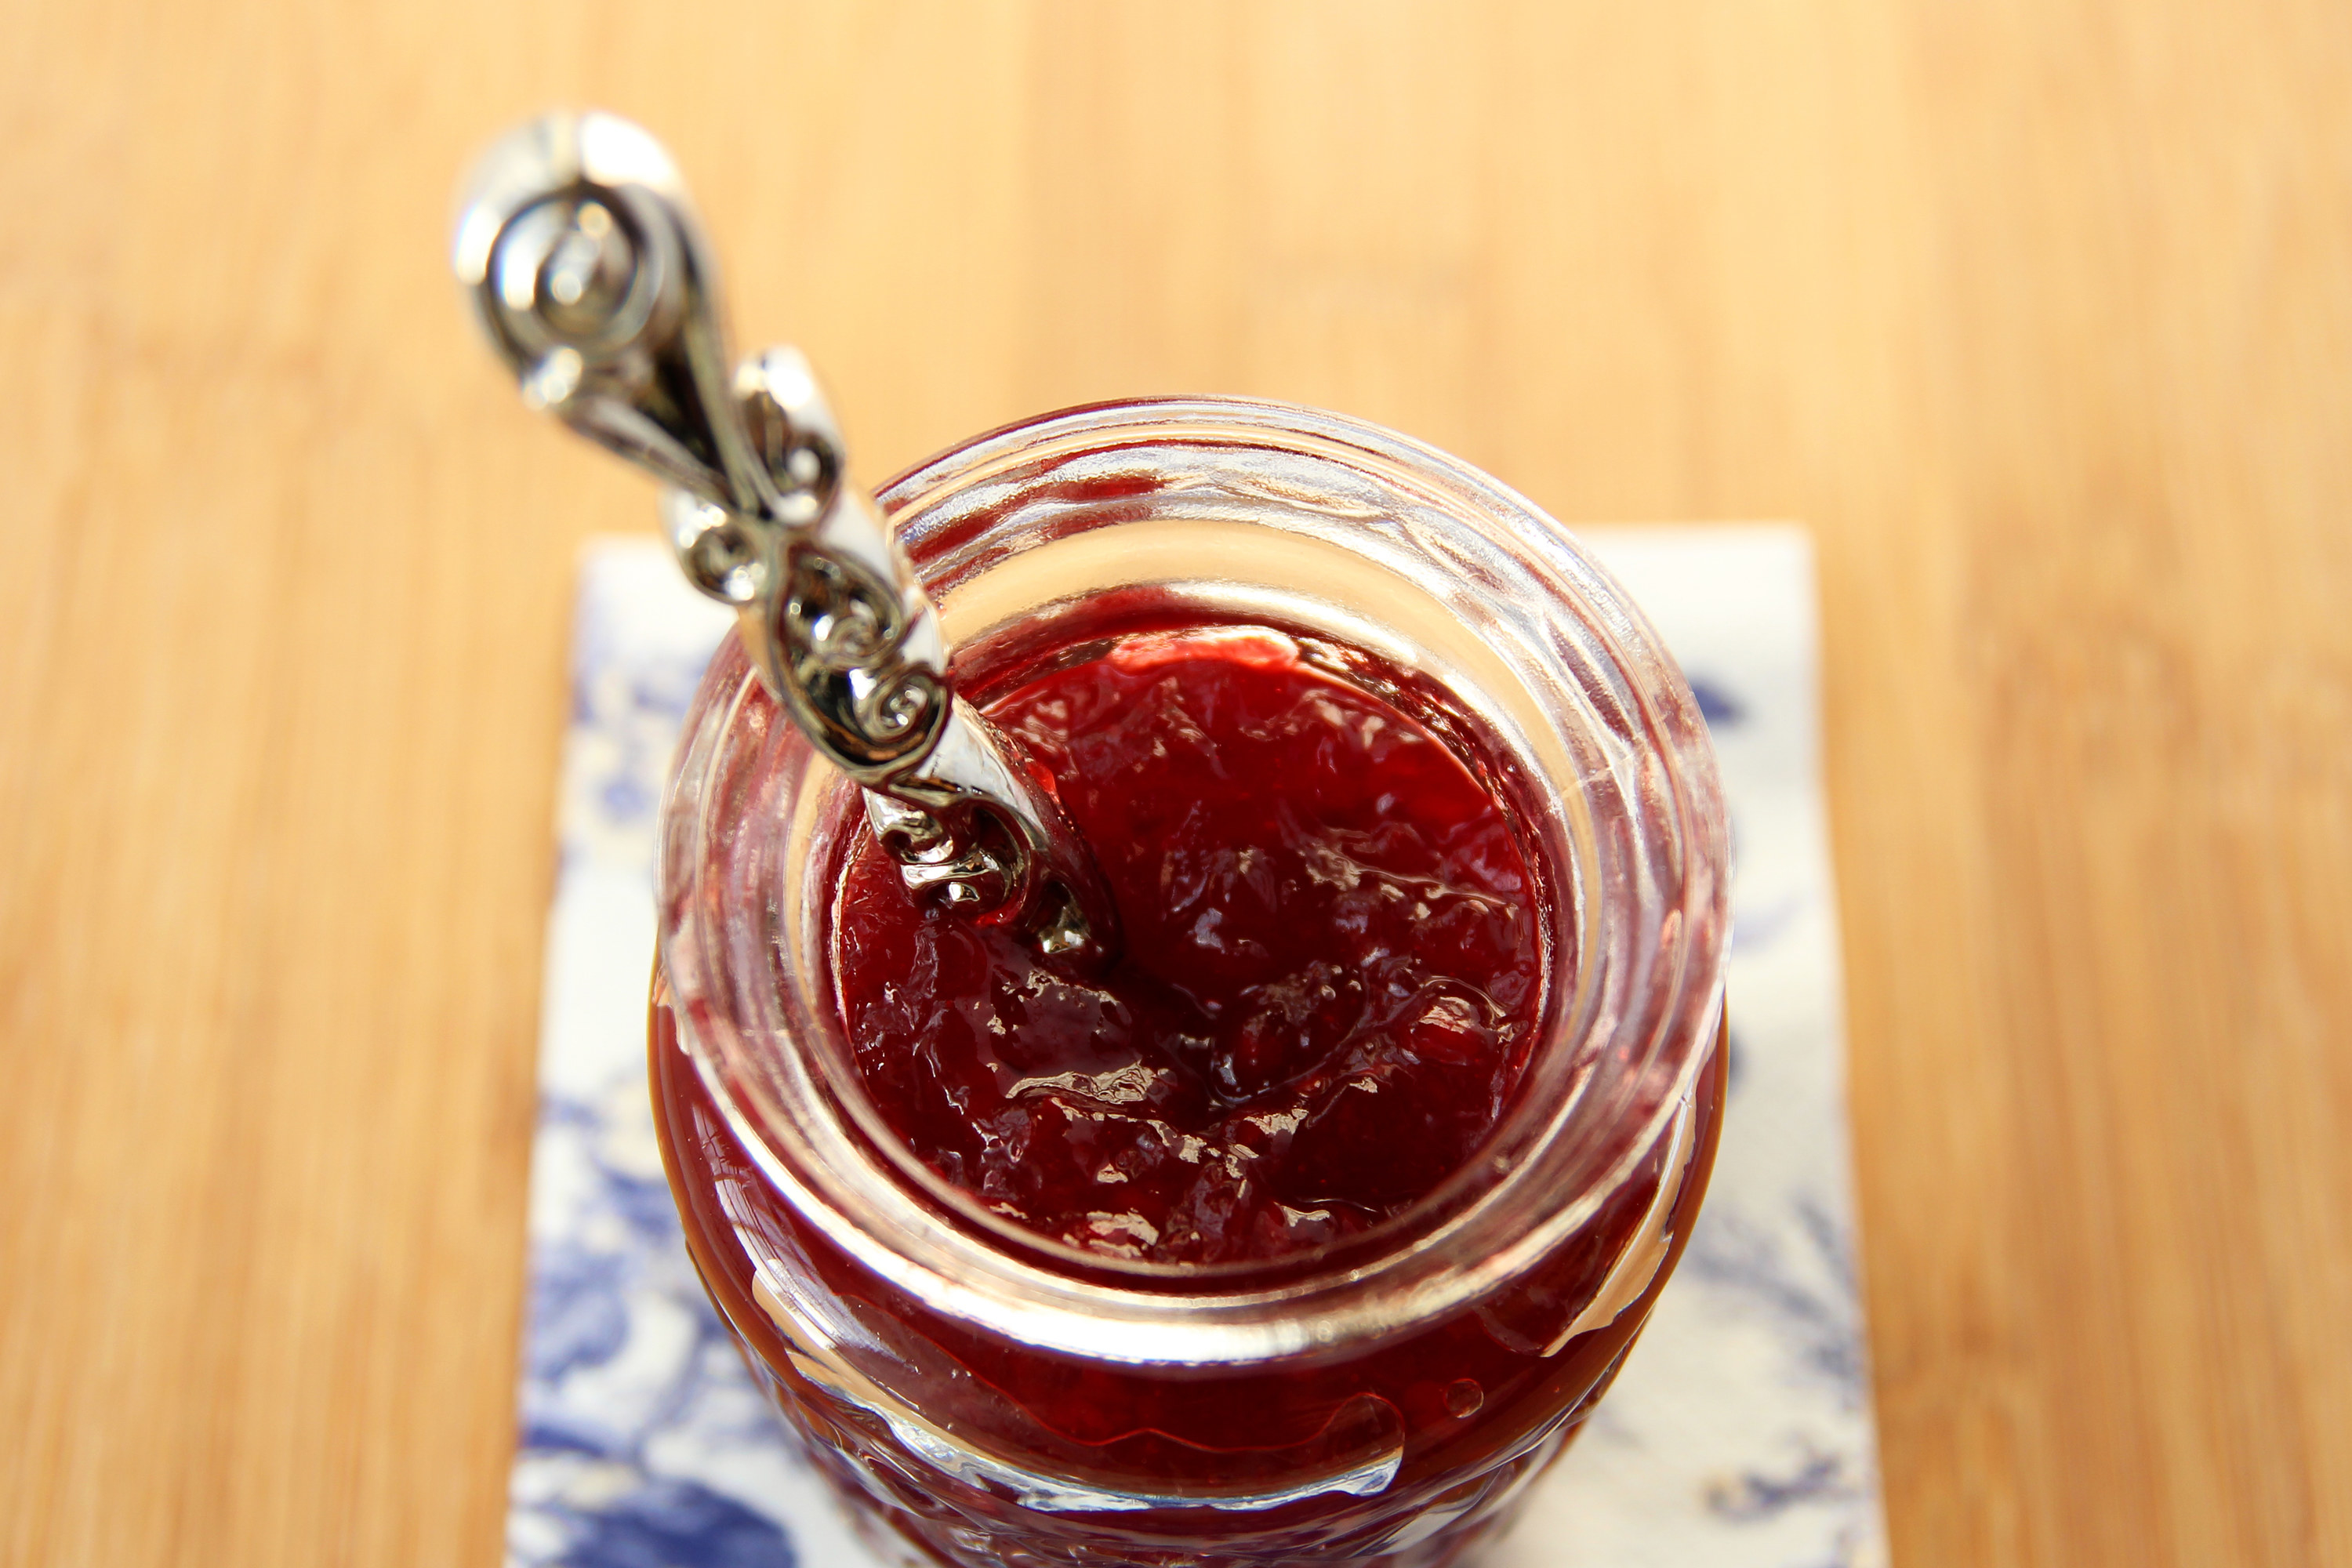 An overhead shot of an open jar of jam with a spoon inside of it